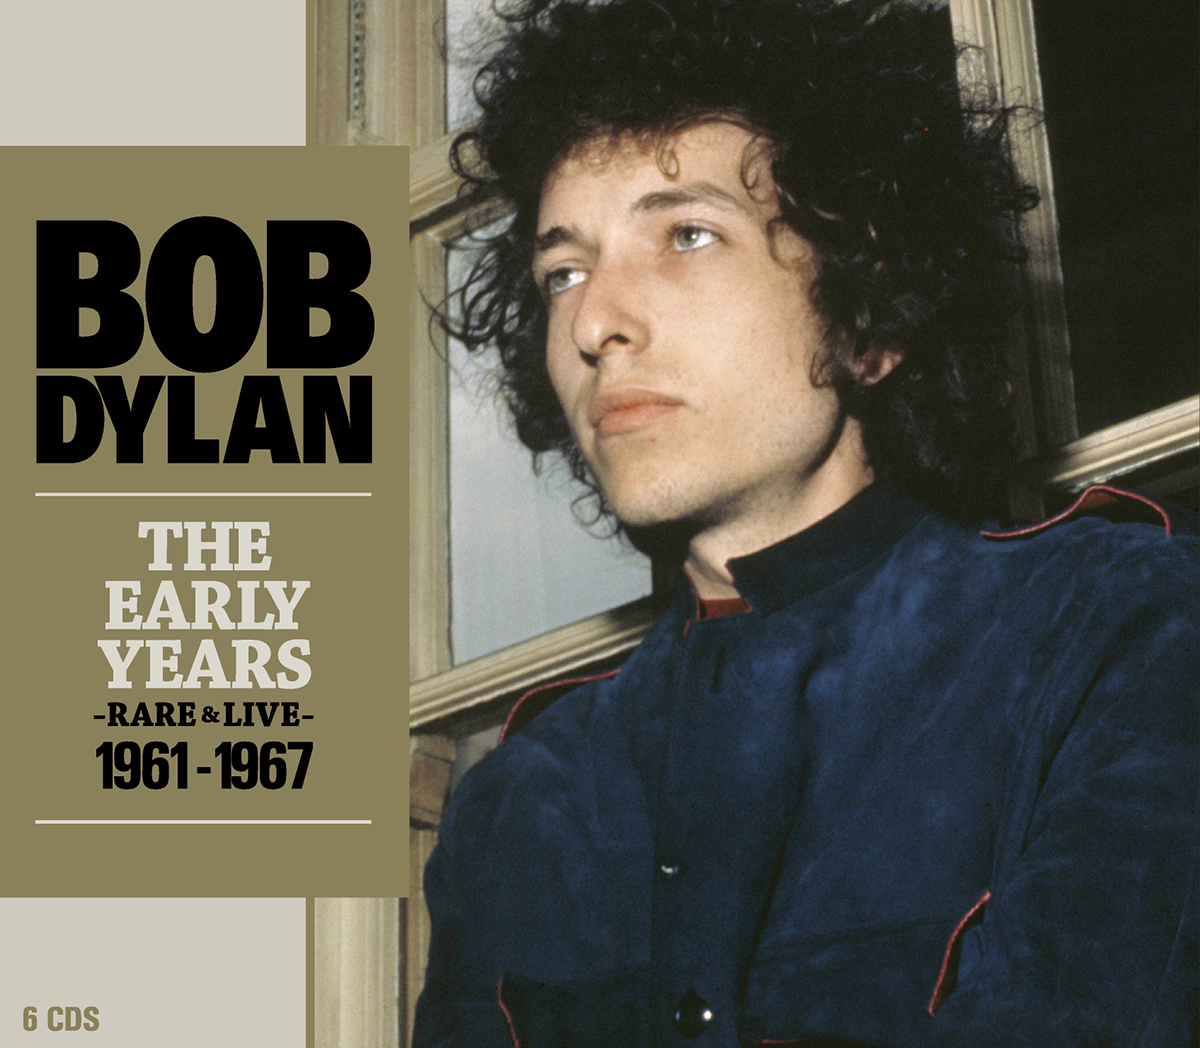 Bob Dylan / THE EARLY YEARS -RARE & LIVE- 1961-1967